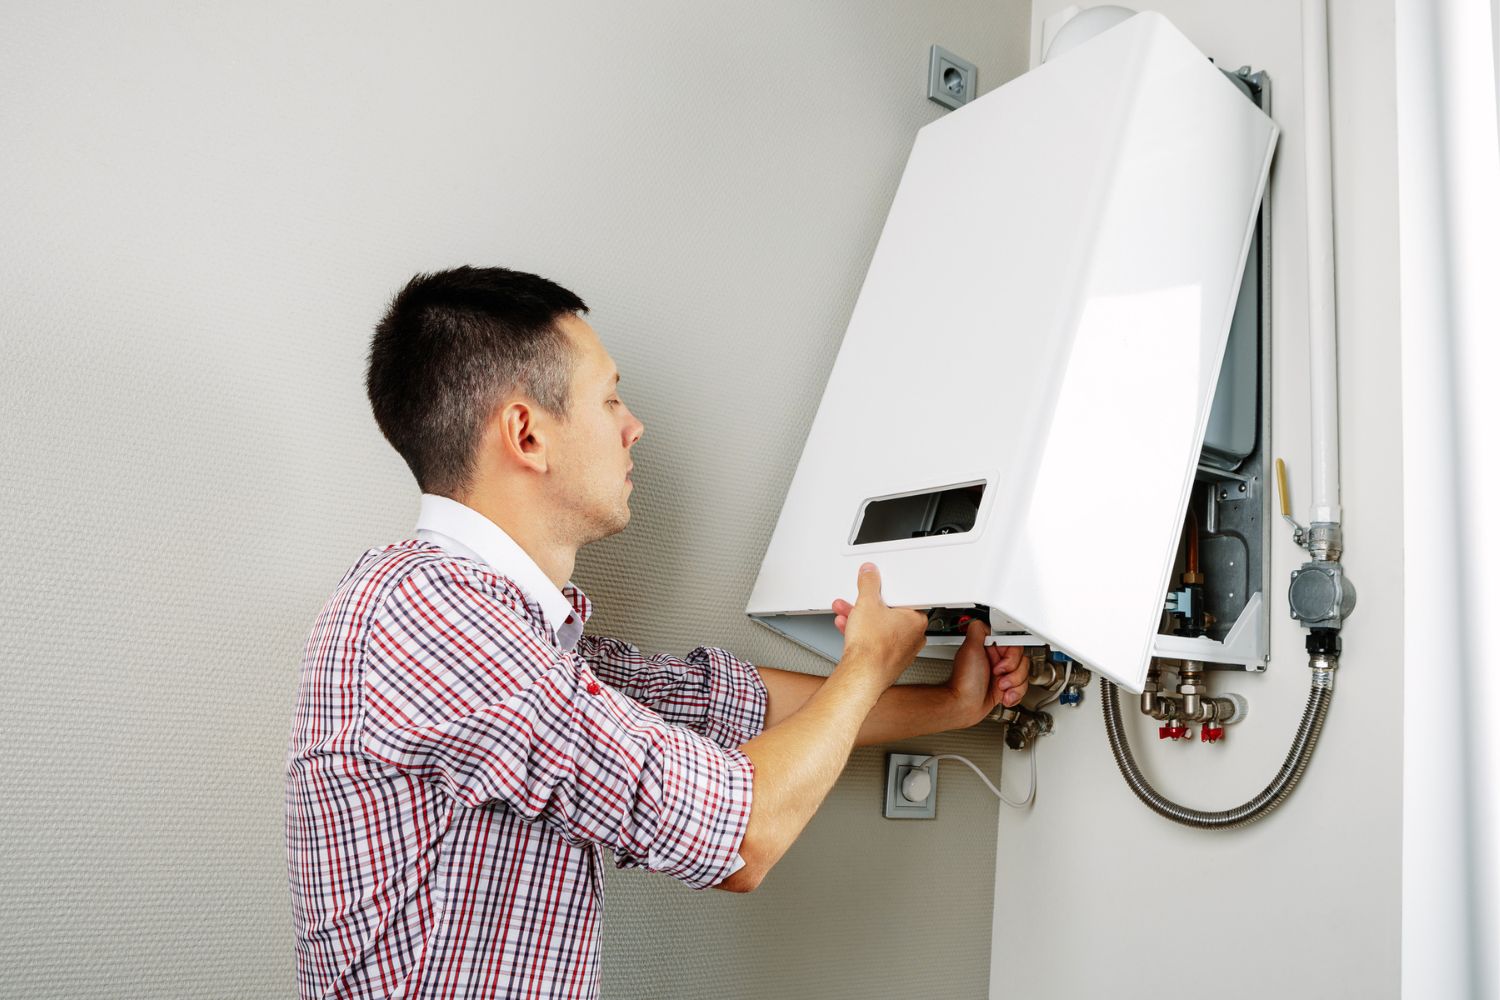 How Much Does a Boiler Service Cost: Expert in boiler repair demonstrating service costs